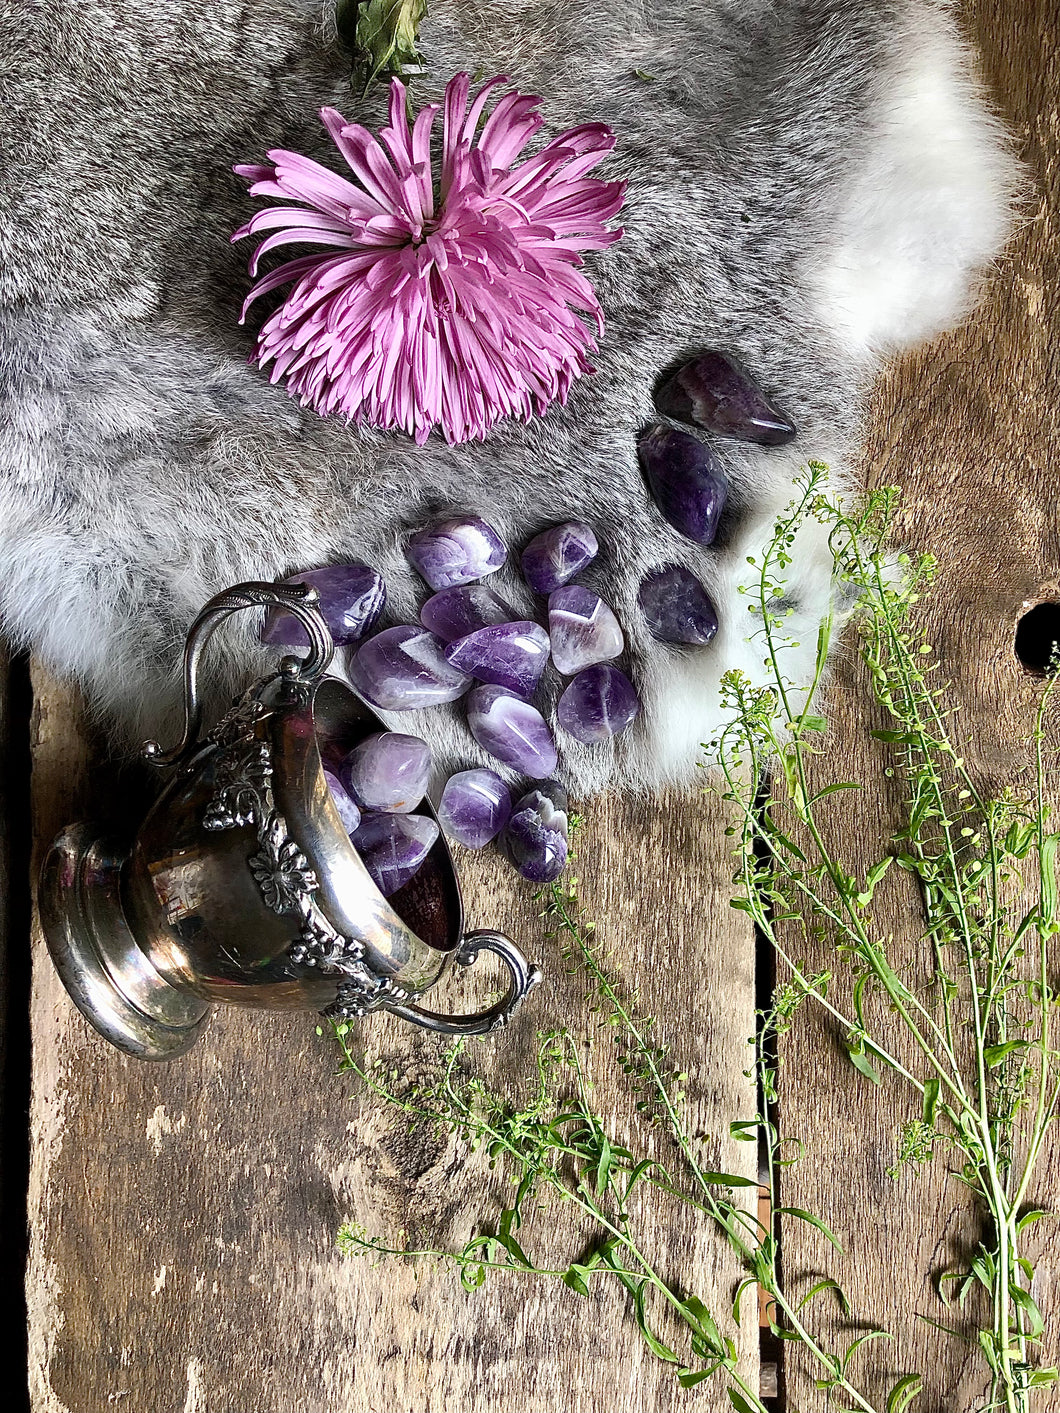 Purple Amethyst tumbled stones spill out of antique silver bowl onto fur, aged wood, framed with green and pink foliage